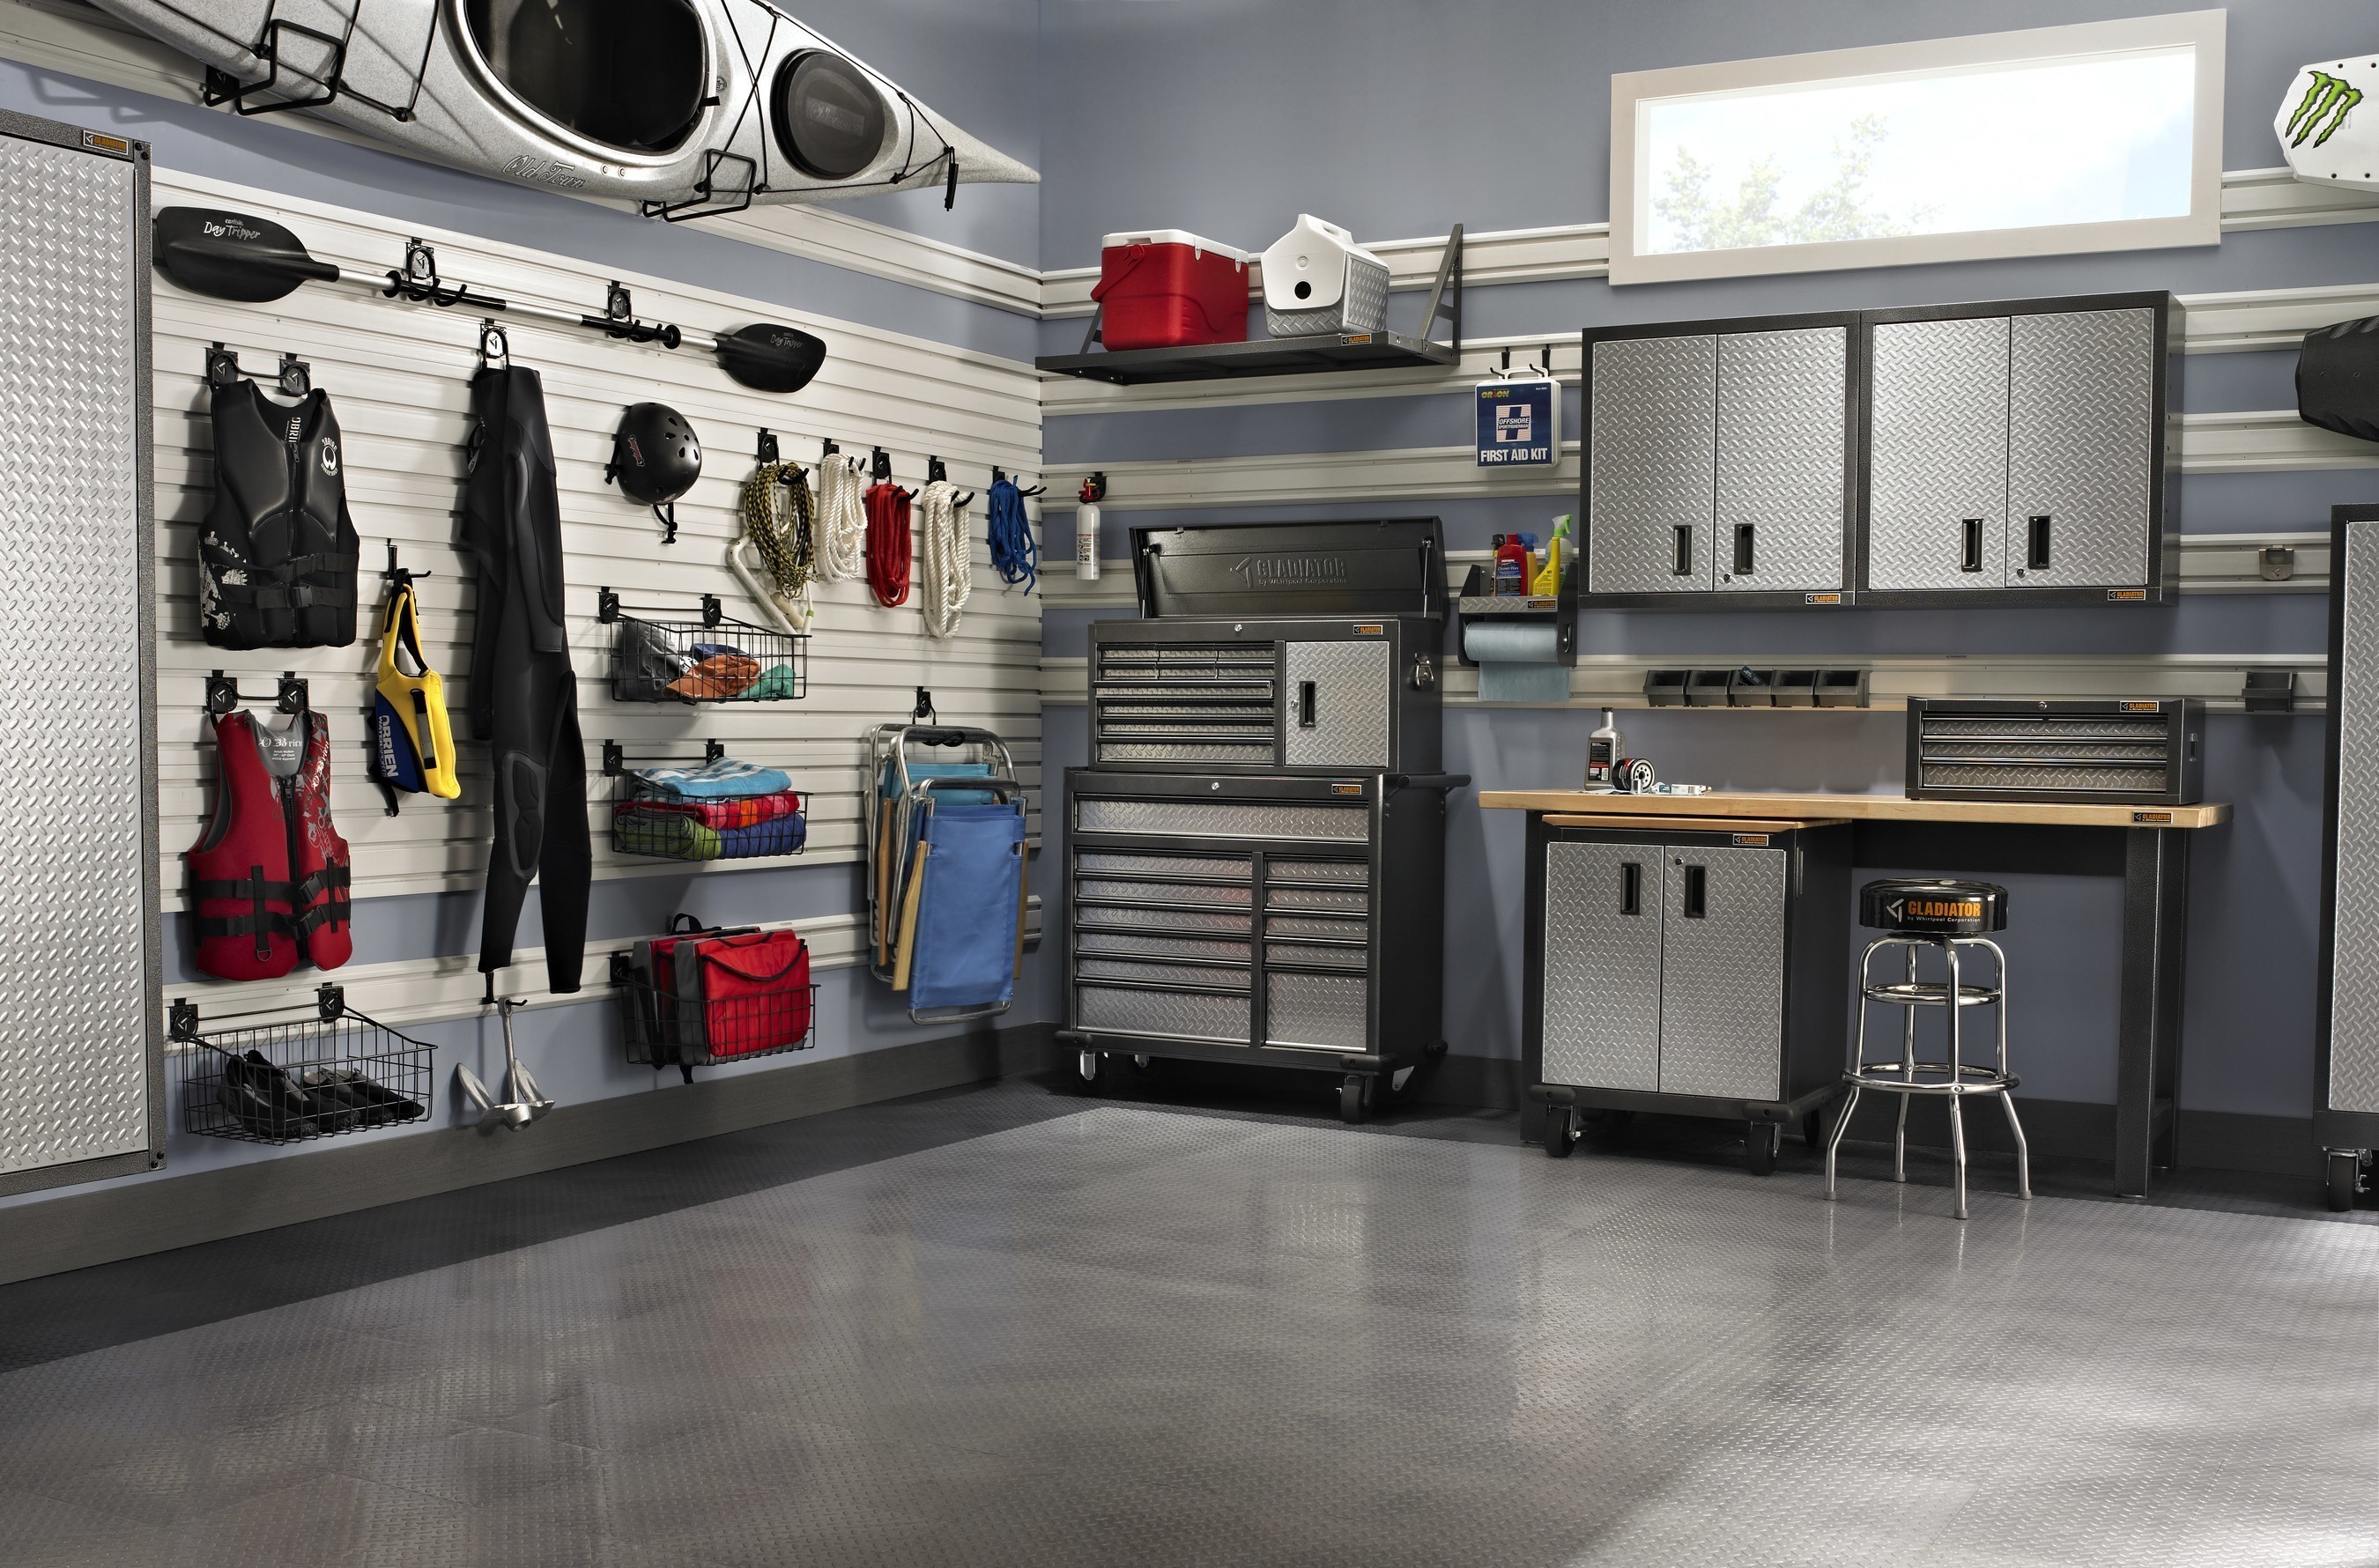 Garage Is Too Cluttered To Fit Their Car, Whirlpool Garage Shelving